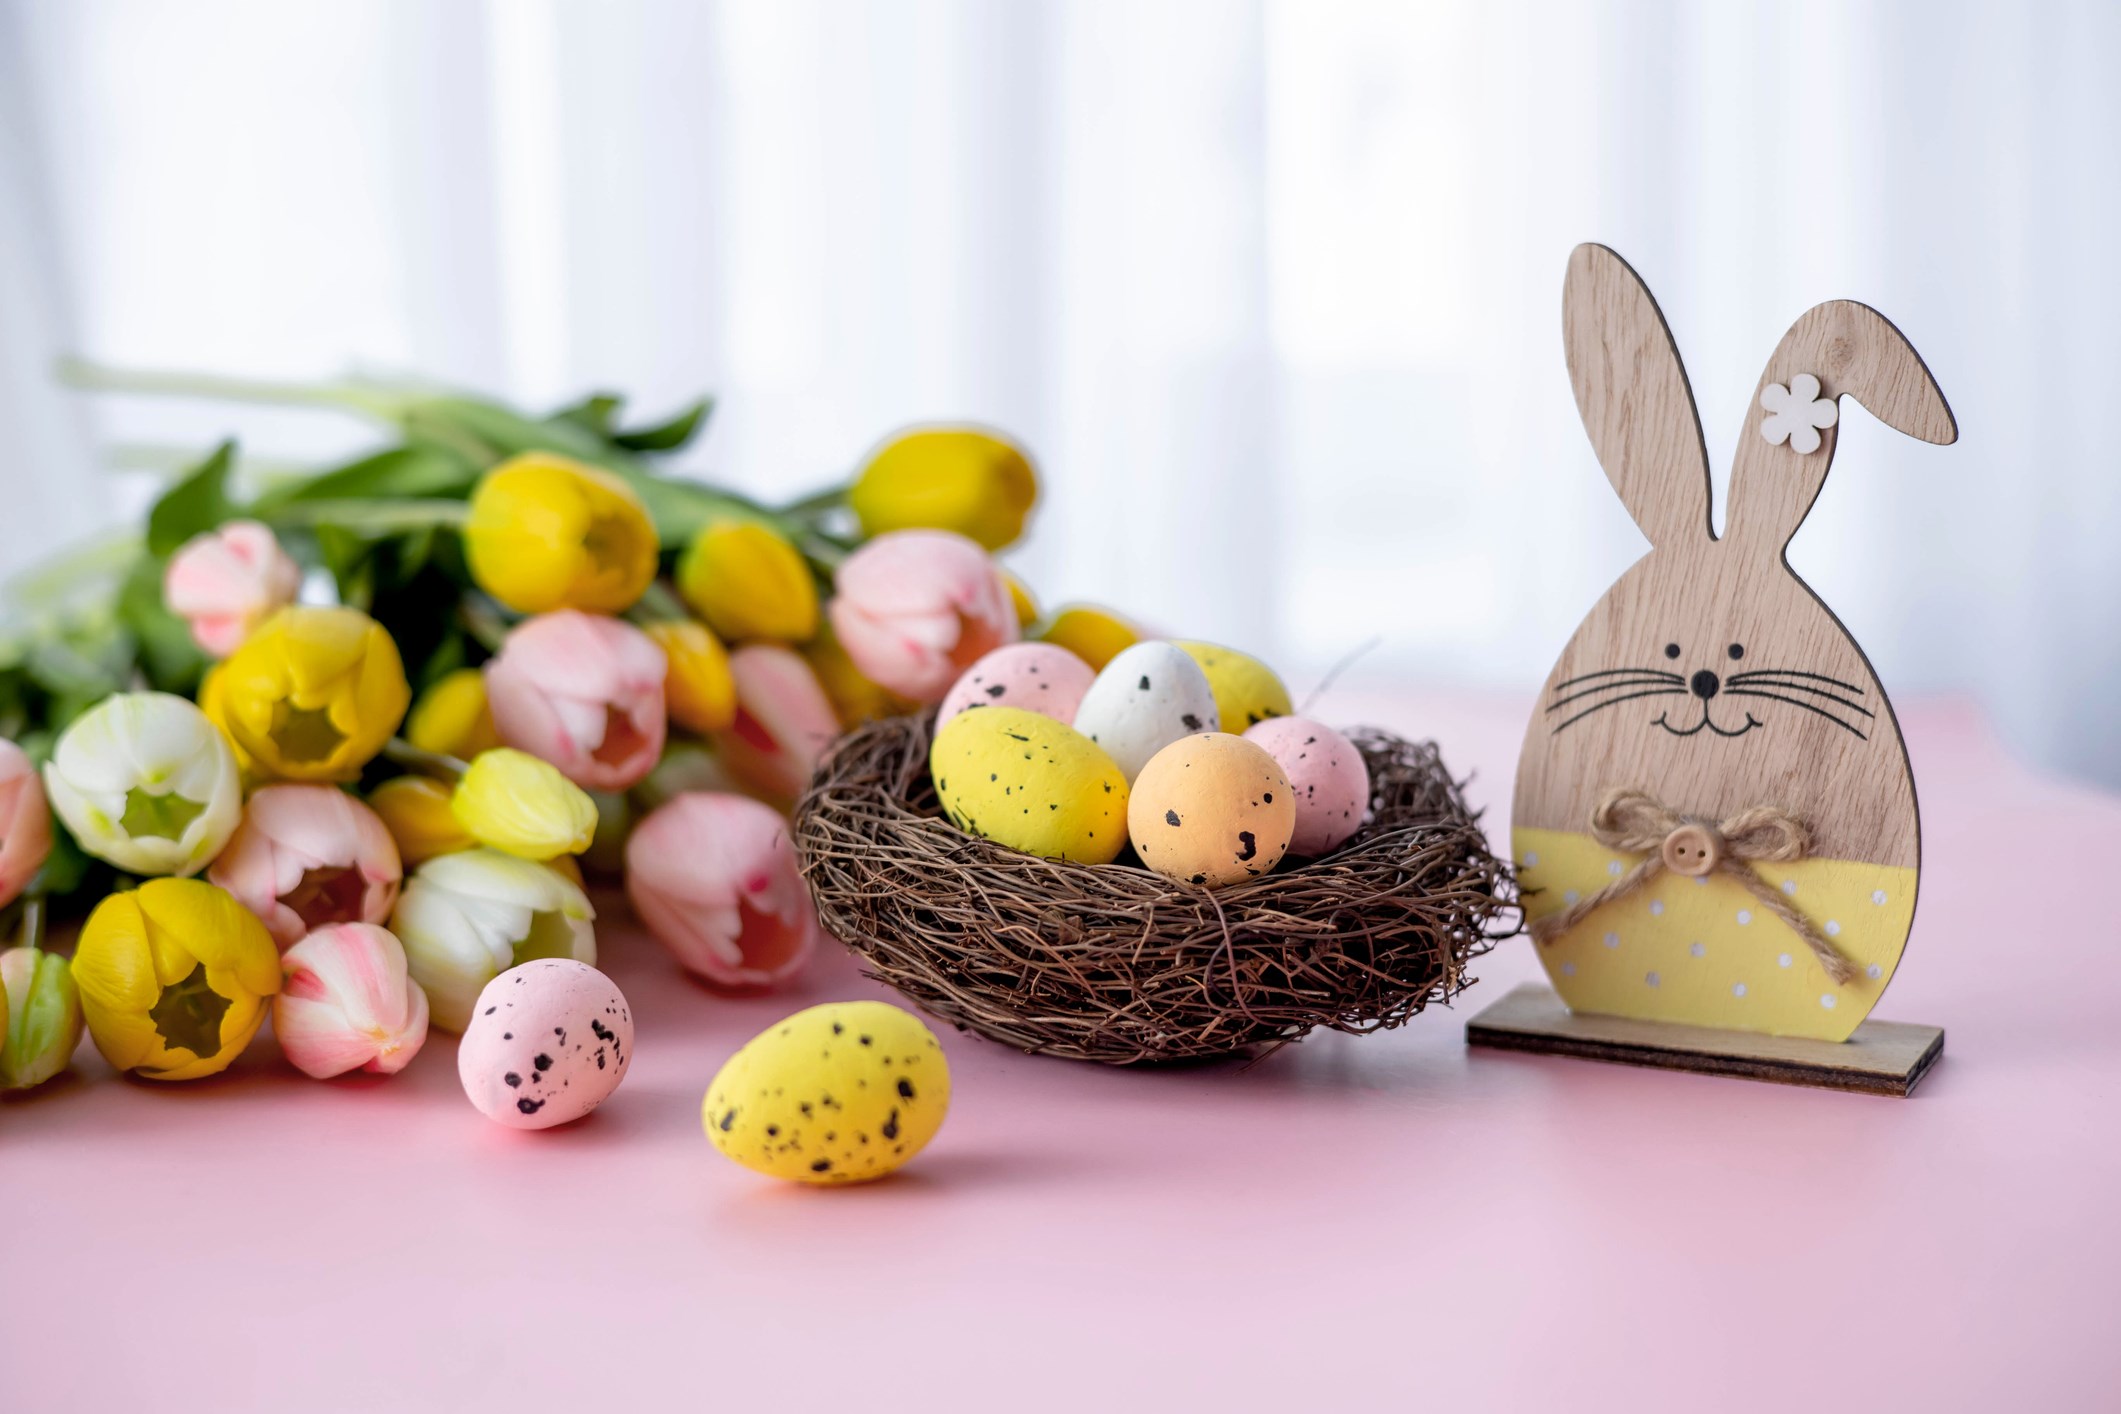 Colorful Easter eggs, tulips, and a wooden hare on a table